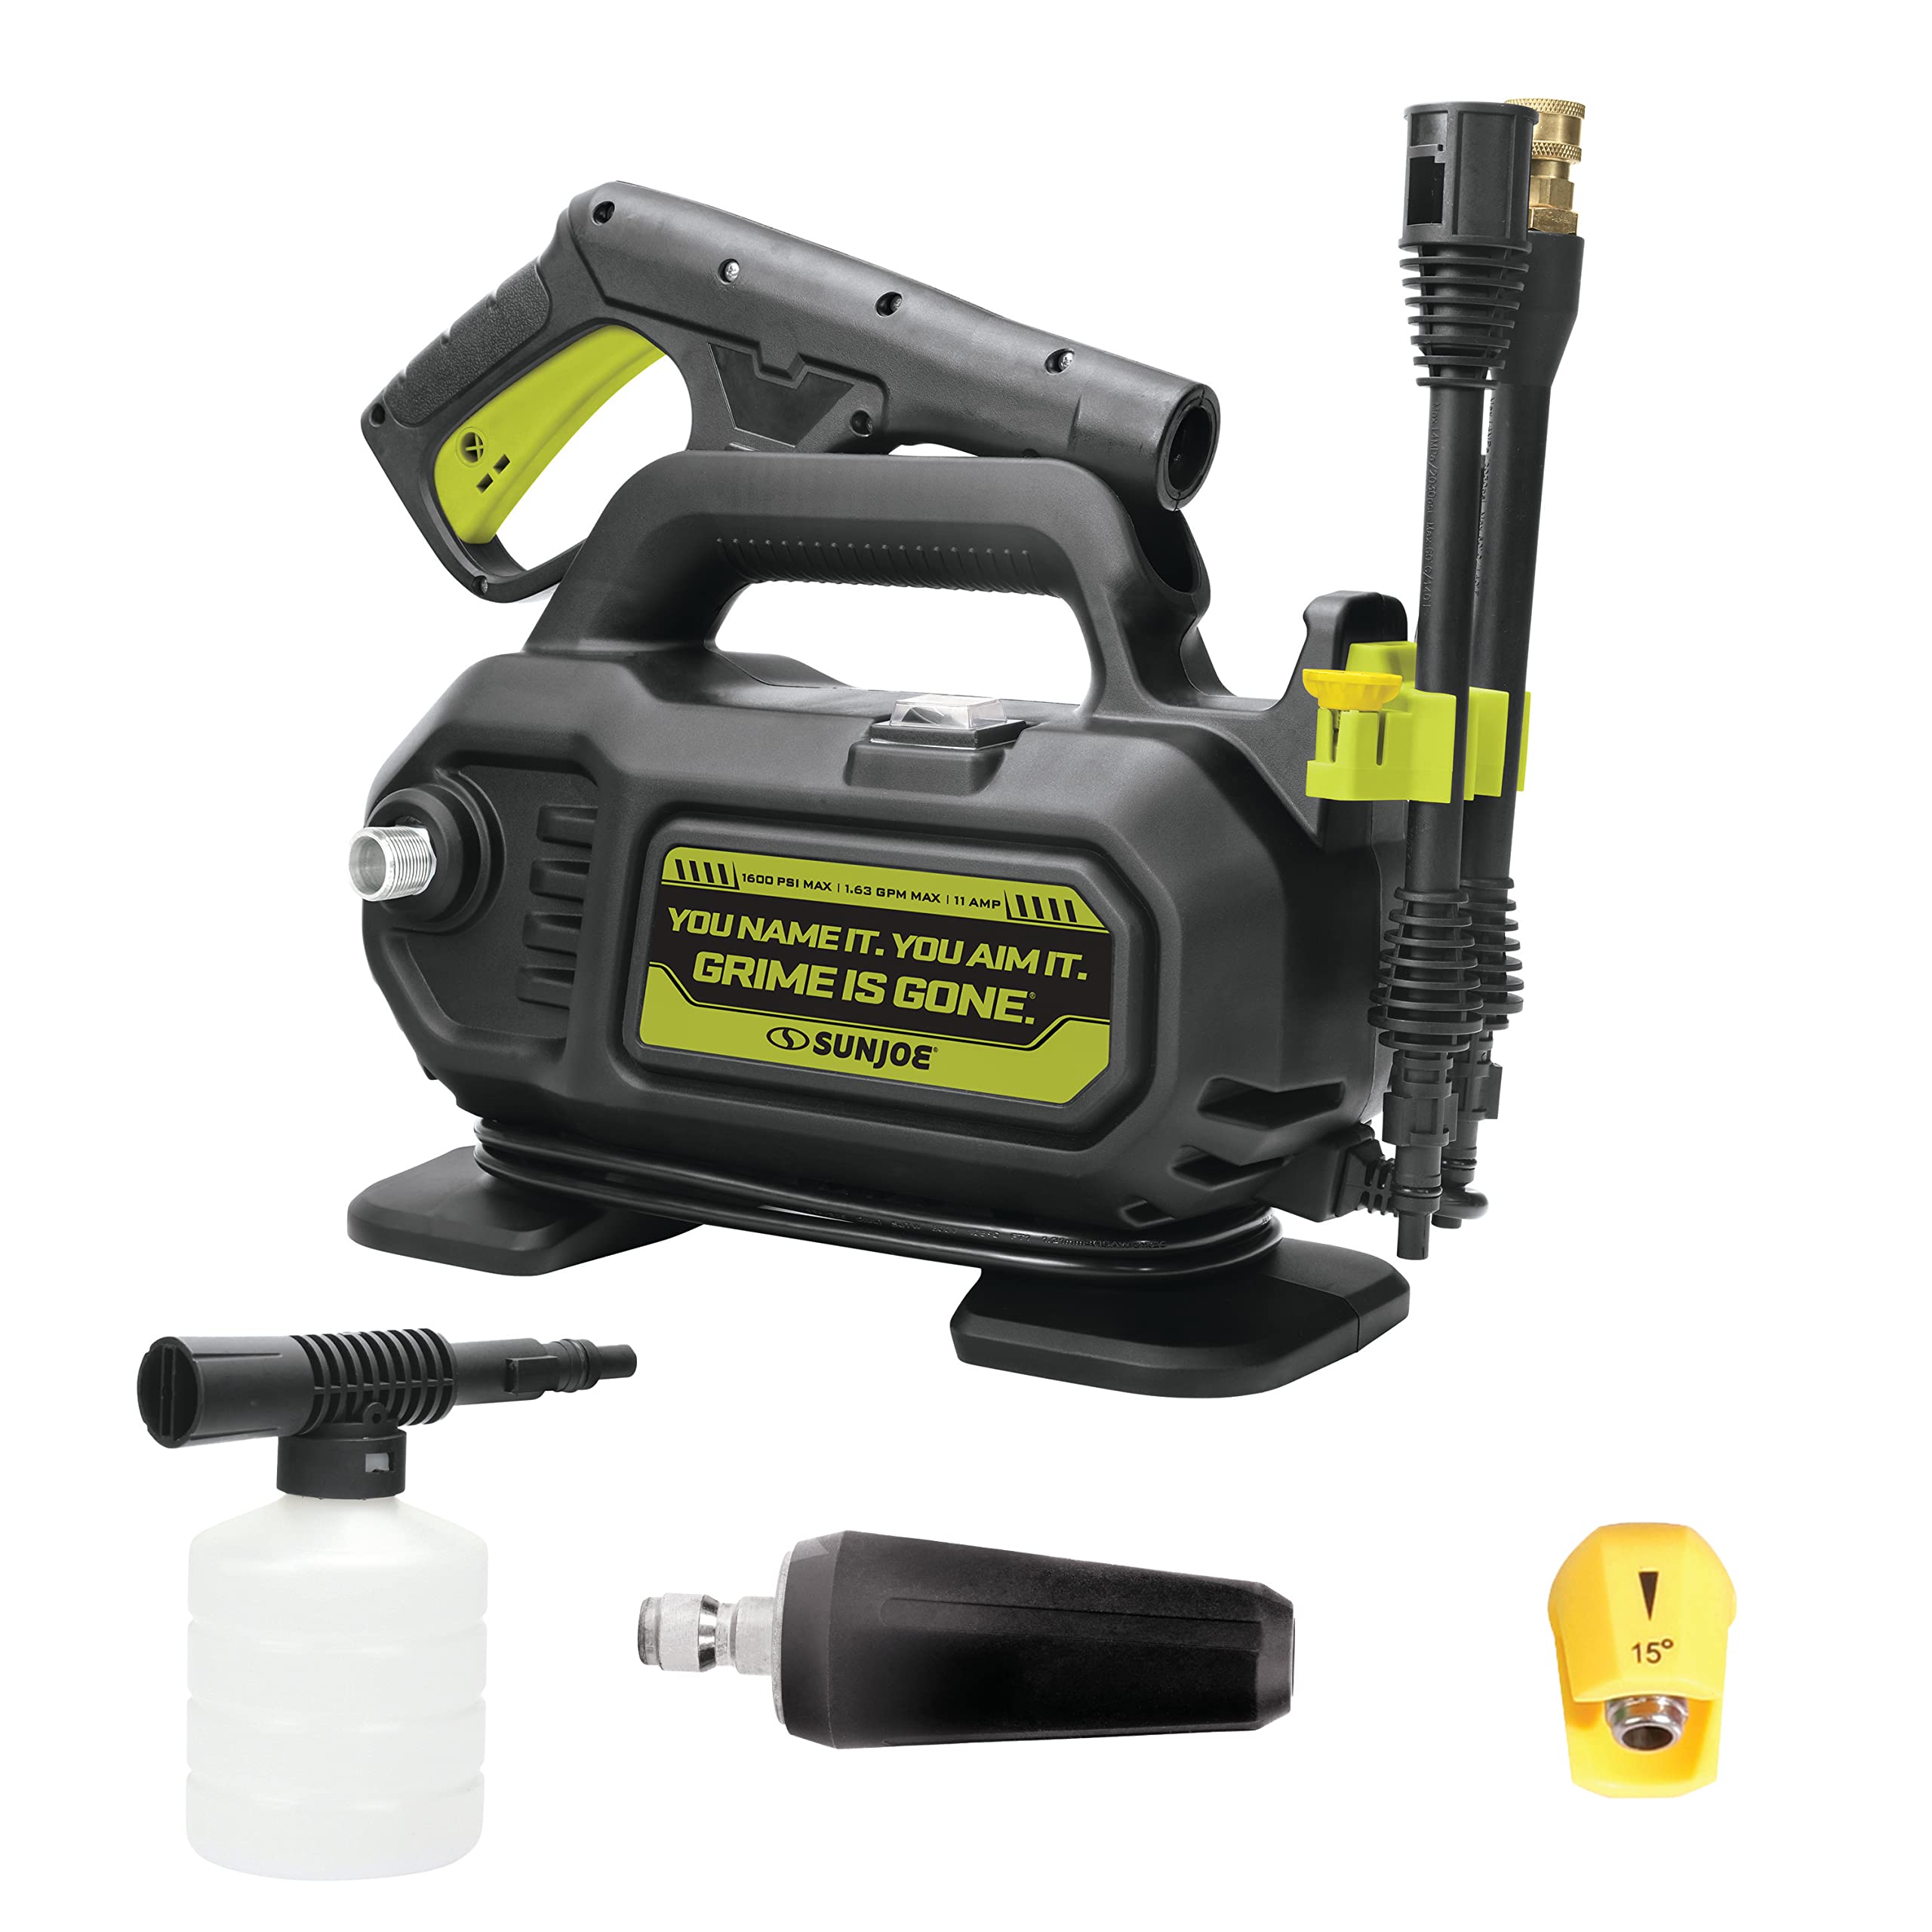 Portable electric pressure washer with attachments including a spray gun, foam cannon, and a 15-degree nozzle.